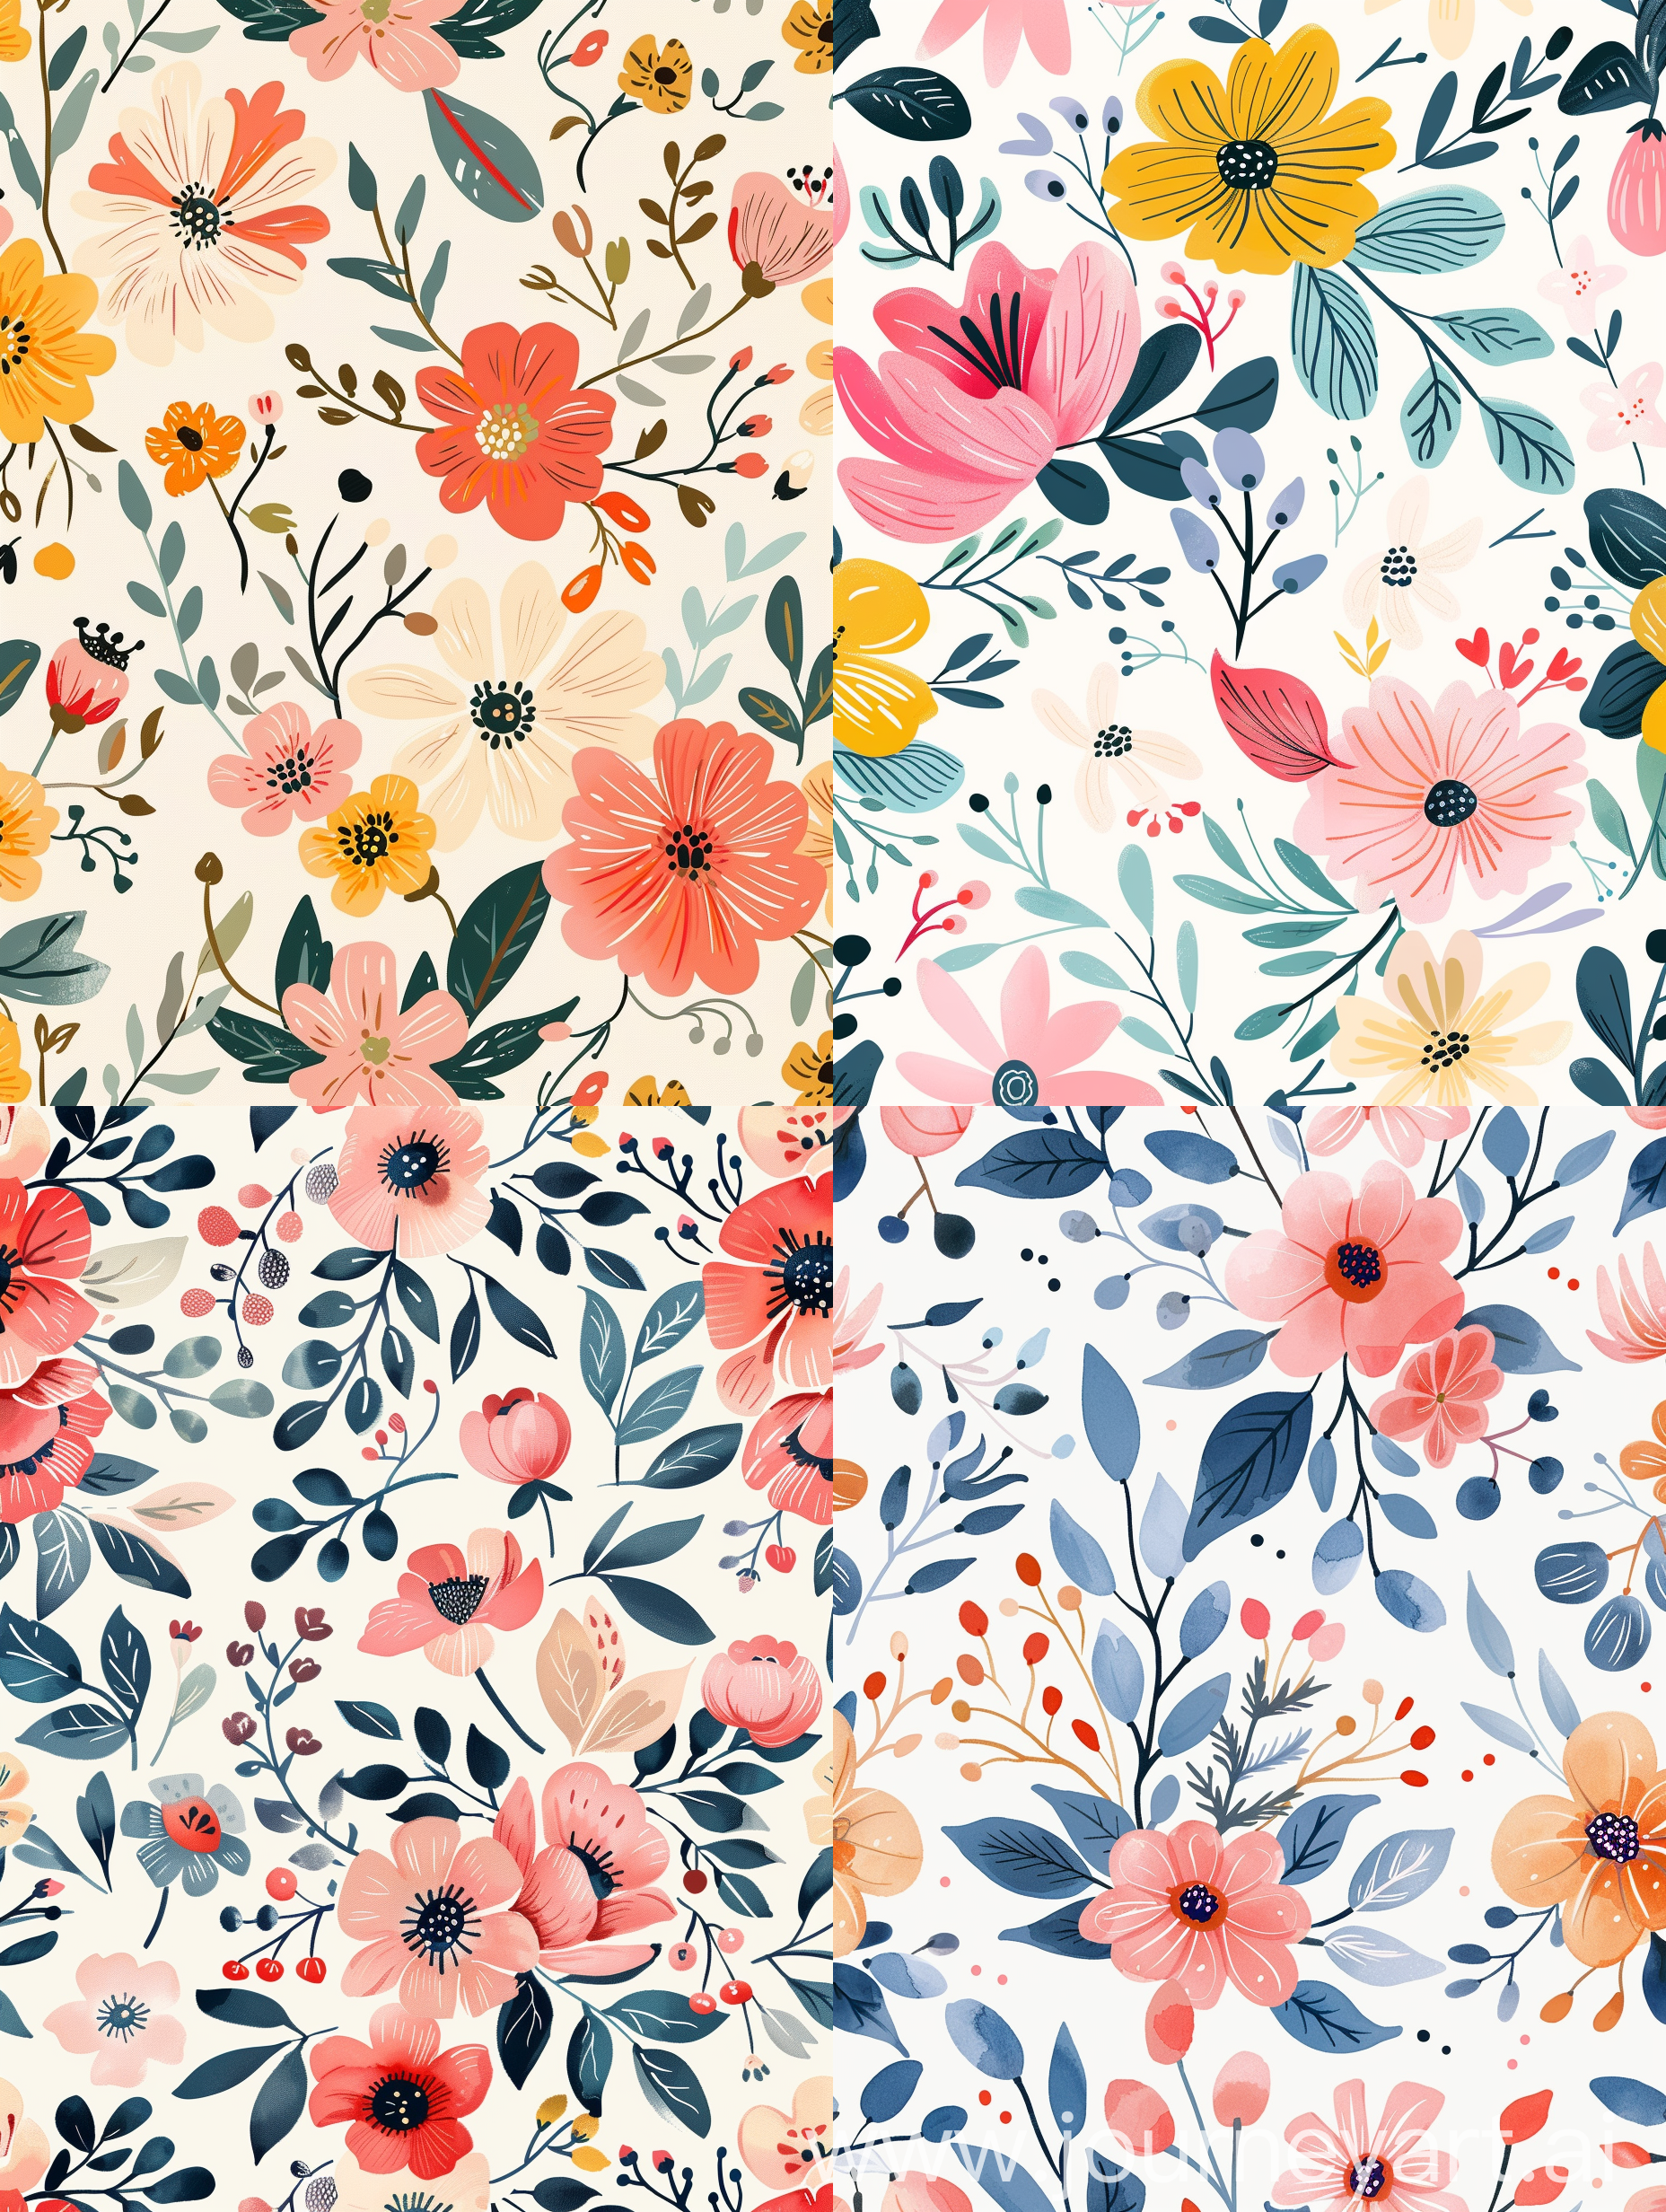 soft, hand drawn floral seamless pattern for kids in illustrator